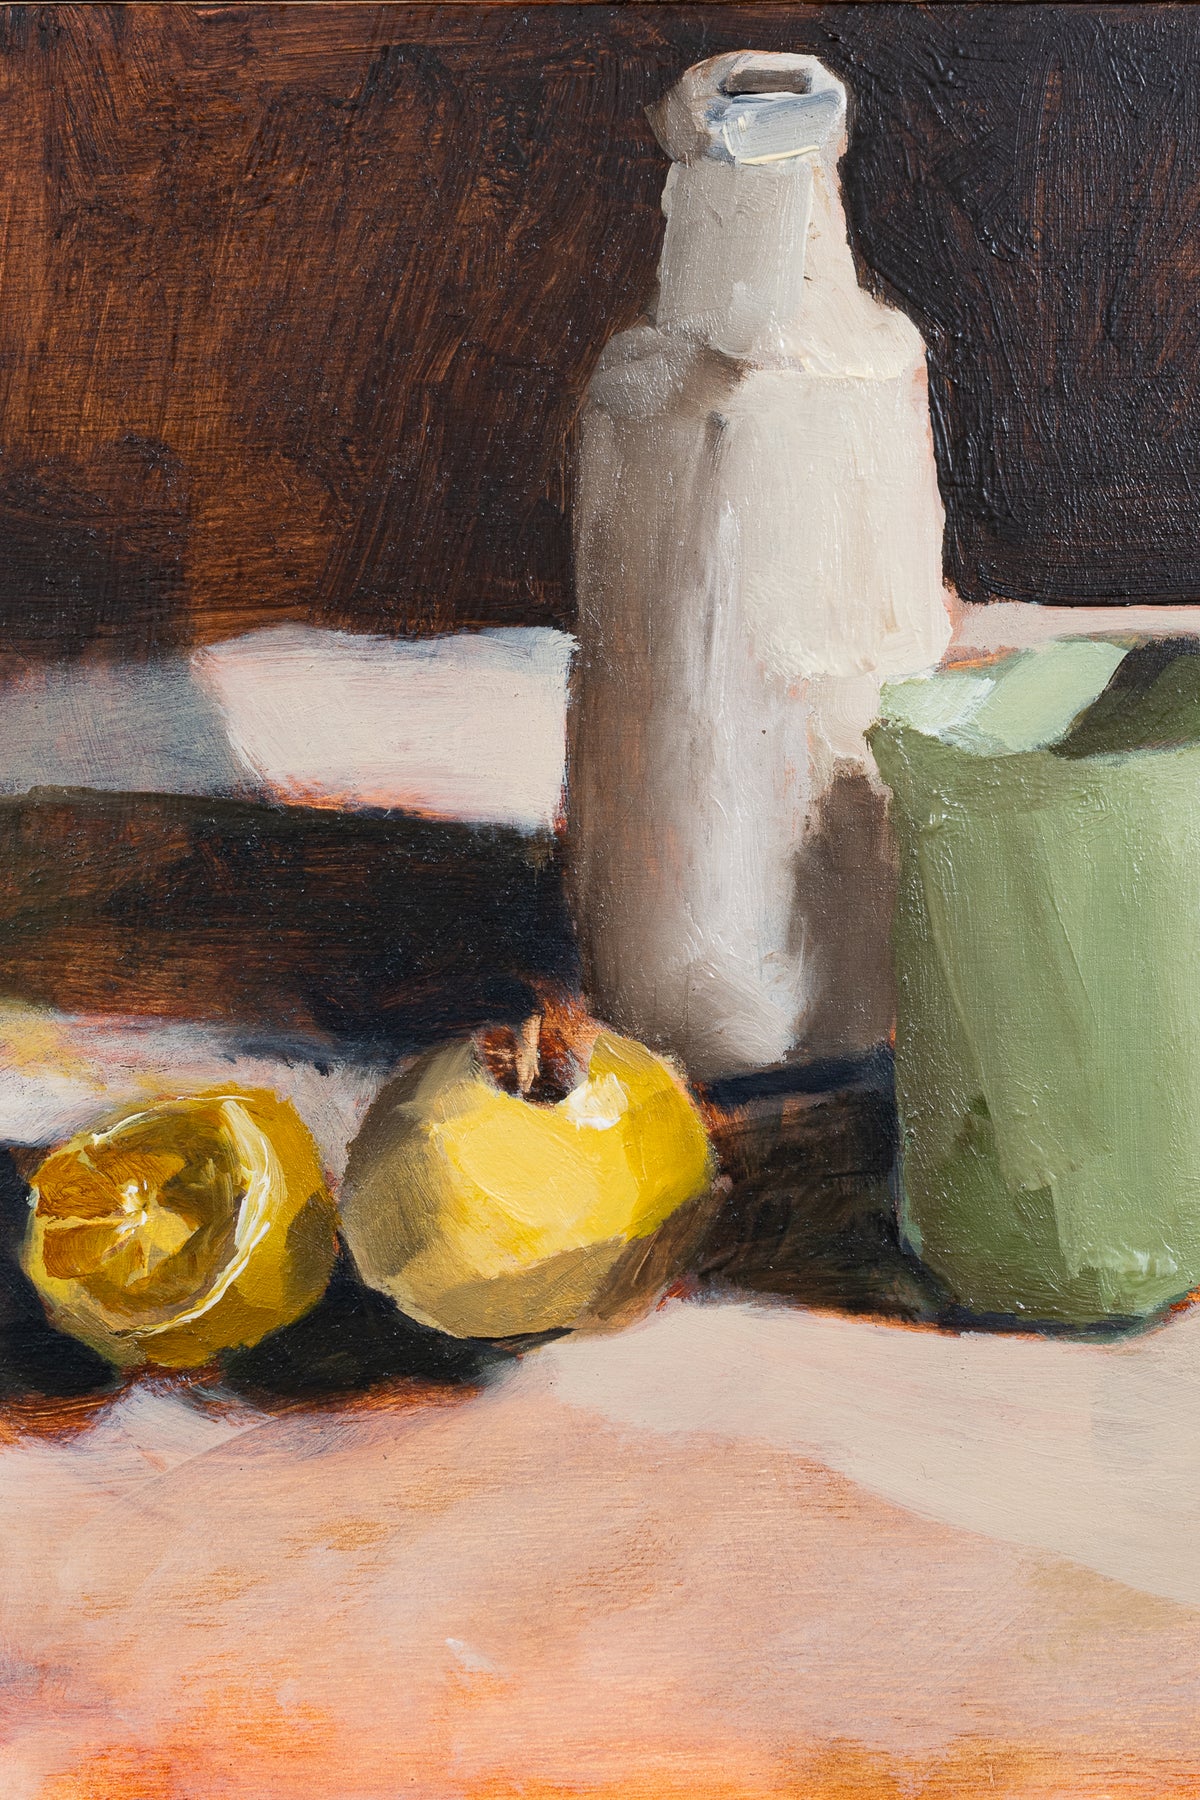 Clay Bottle and Green Jug with Lemons